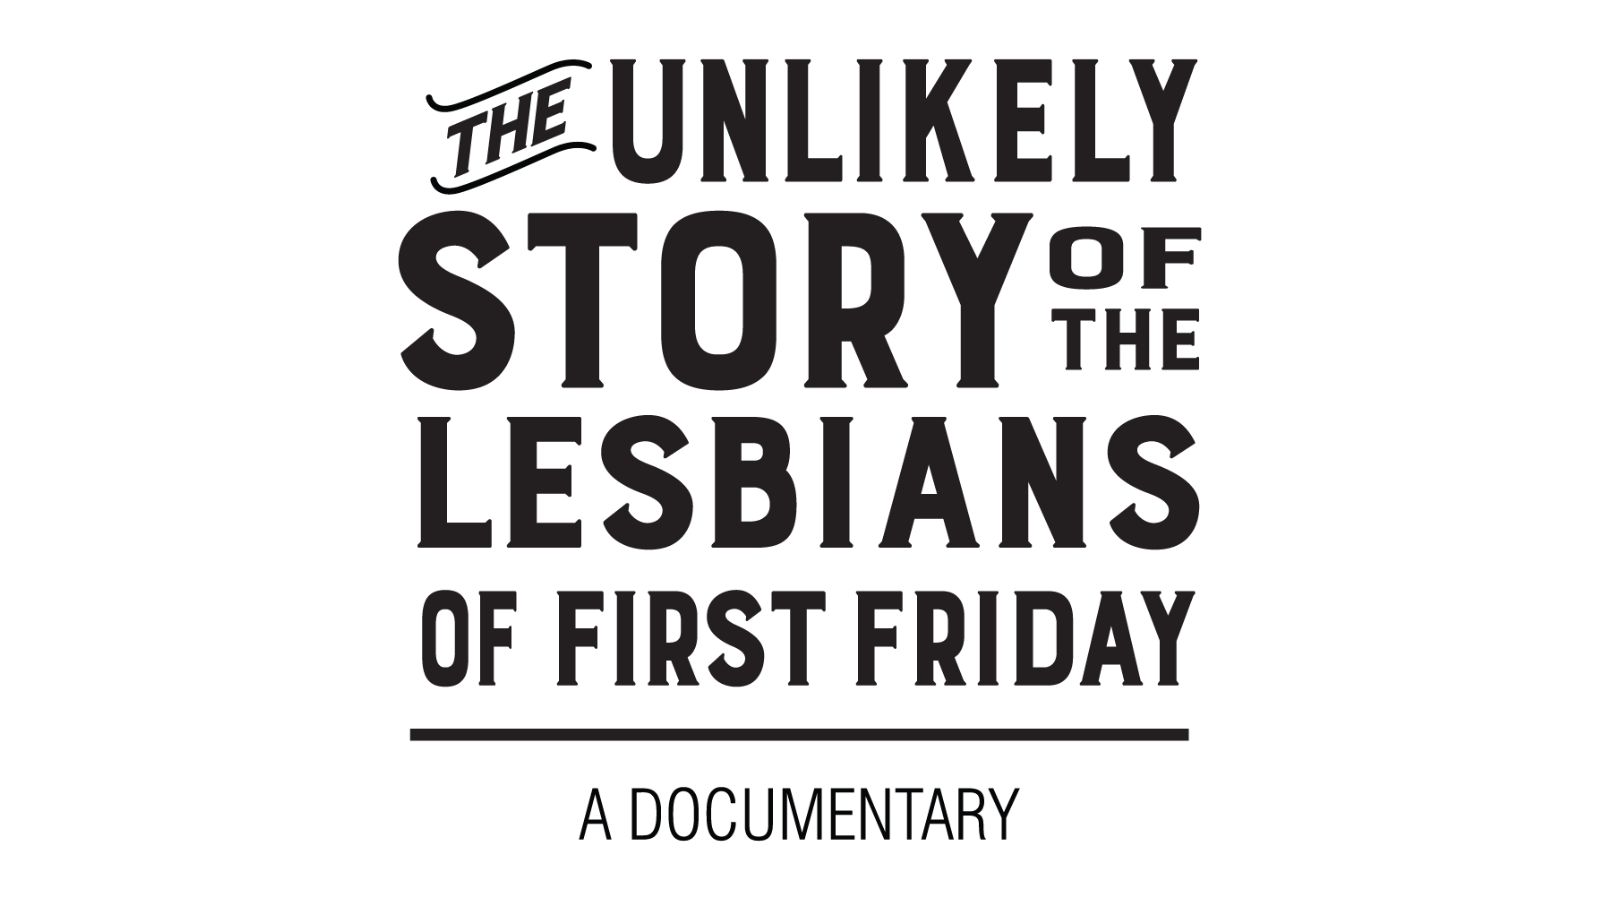 The Unlikely Story of the Lesbians of First Friday: A Documentary